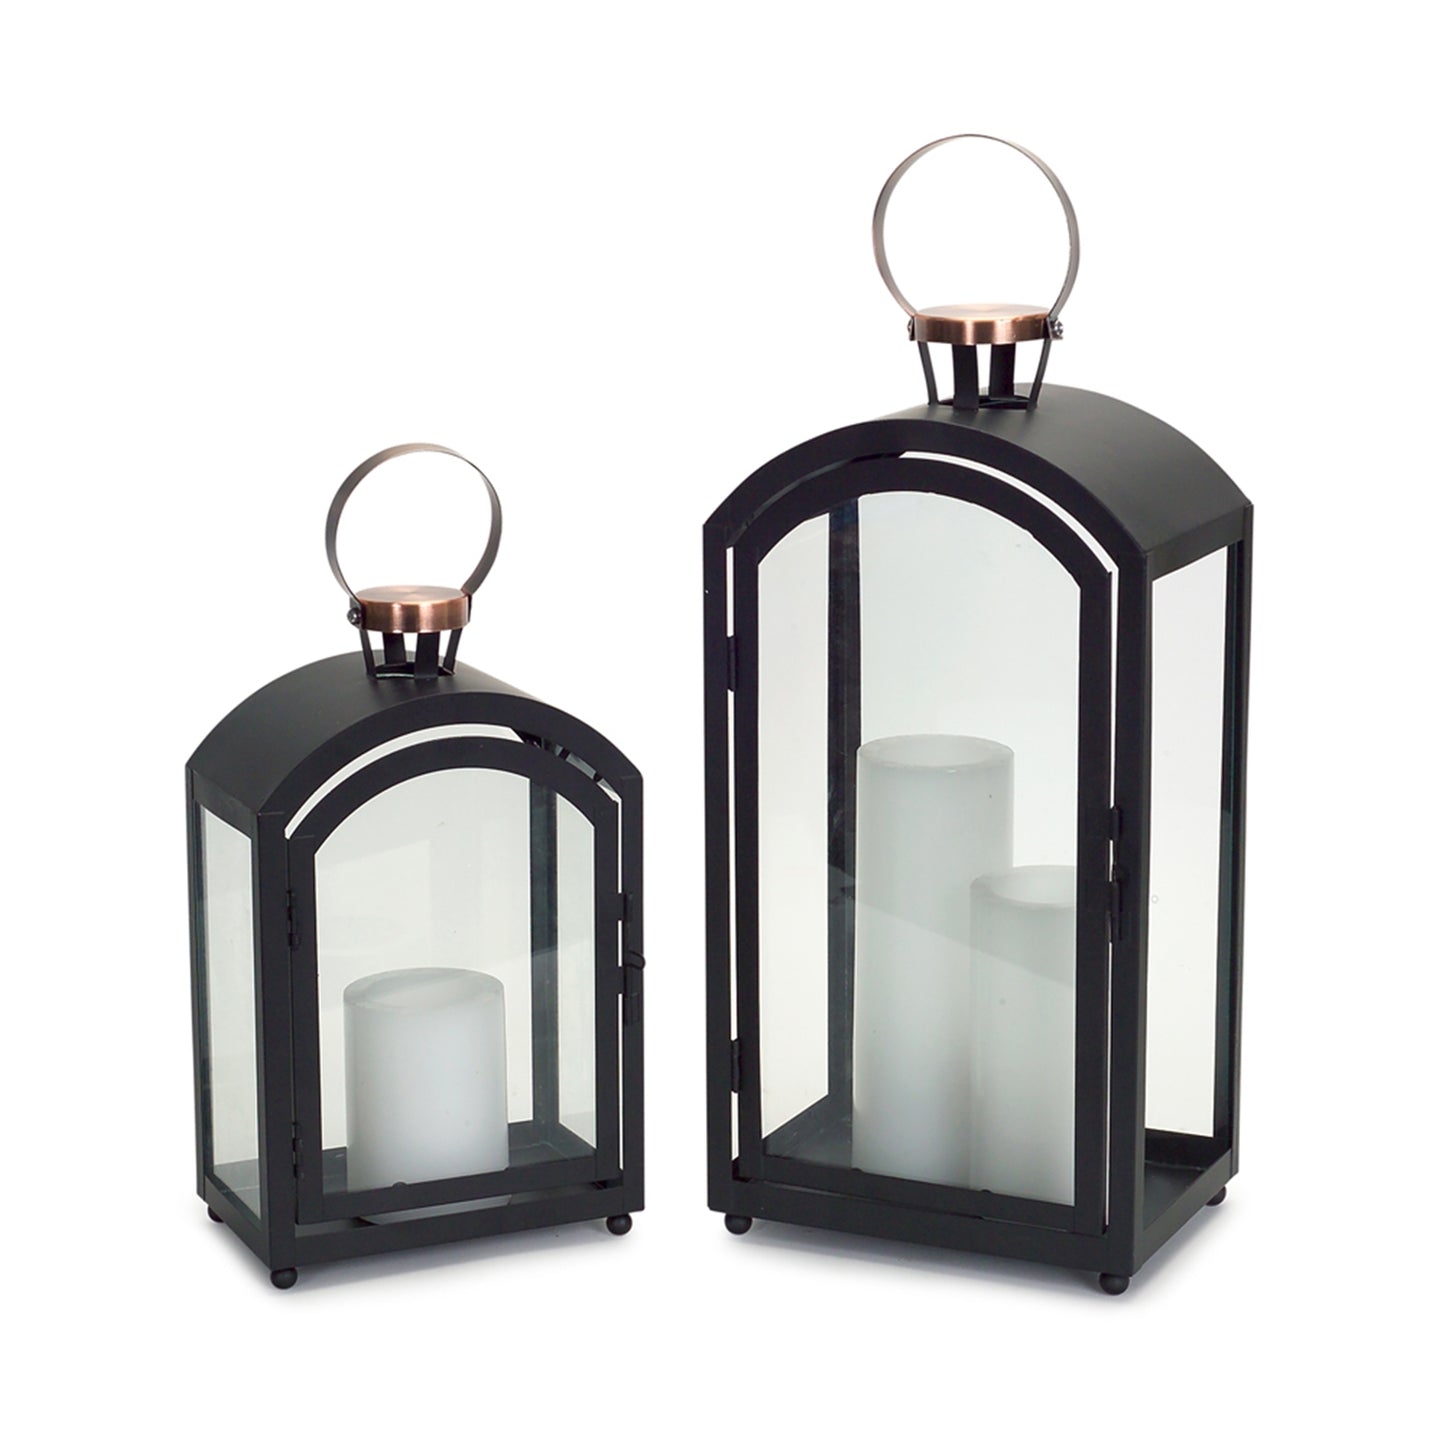 Modern black and copper metal glass lantern with white candles. Candles not included.  